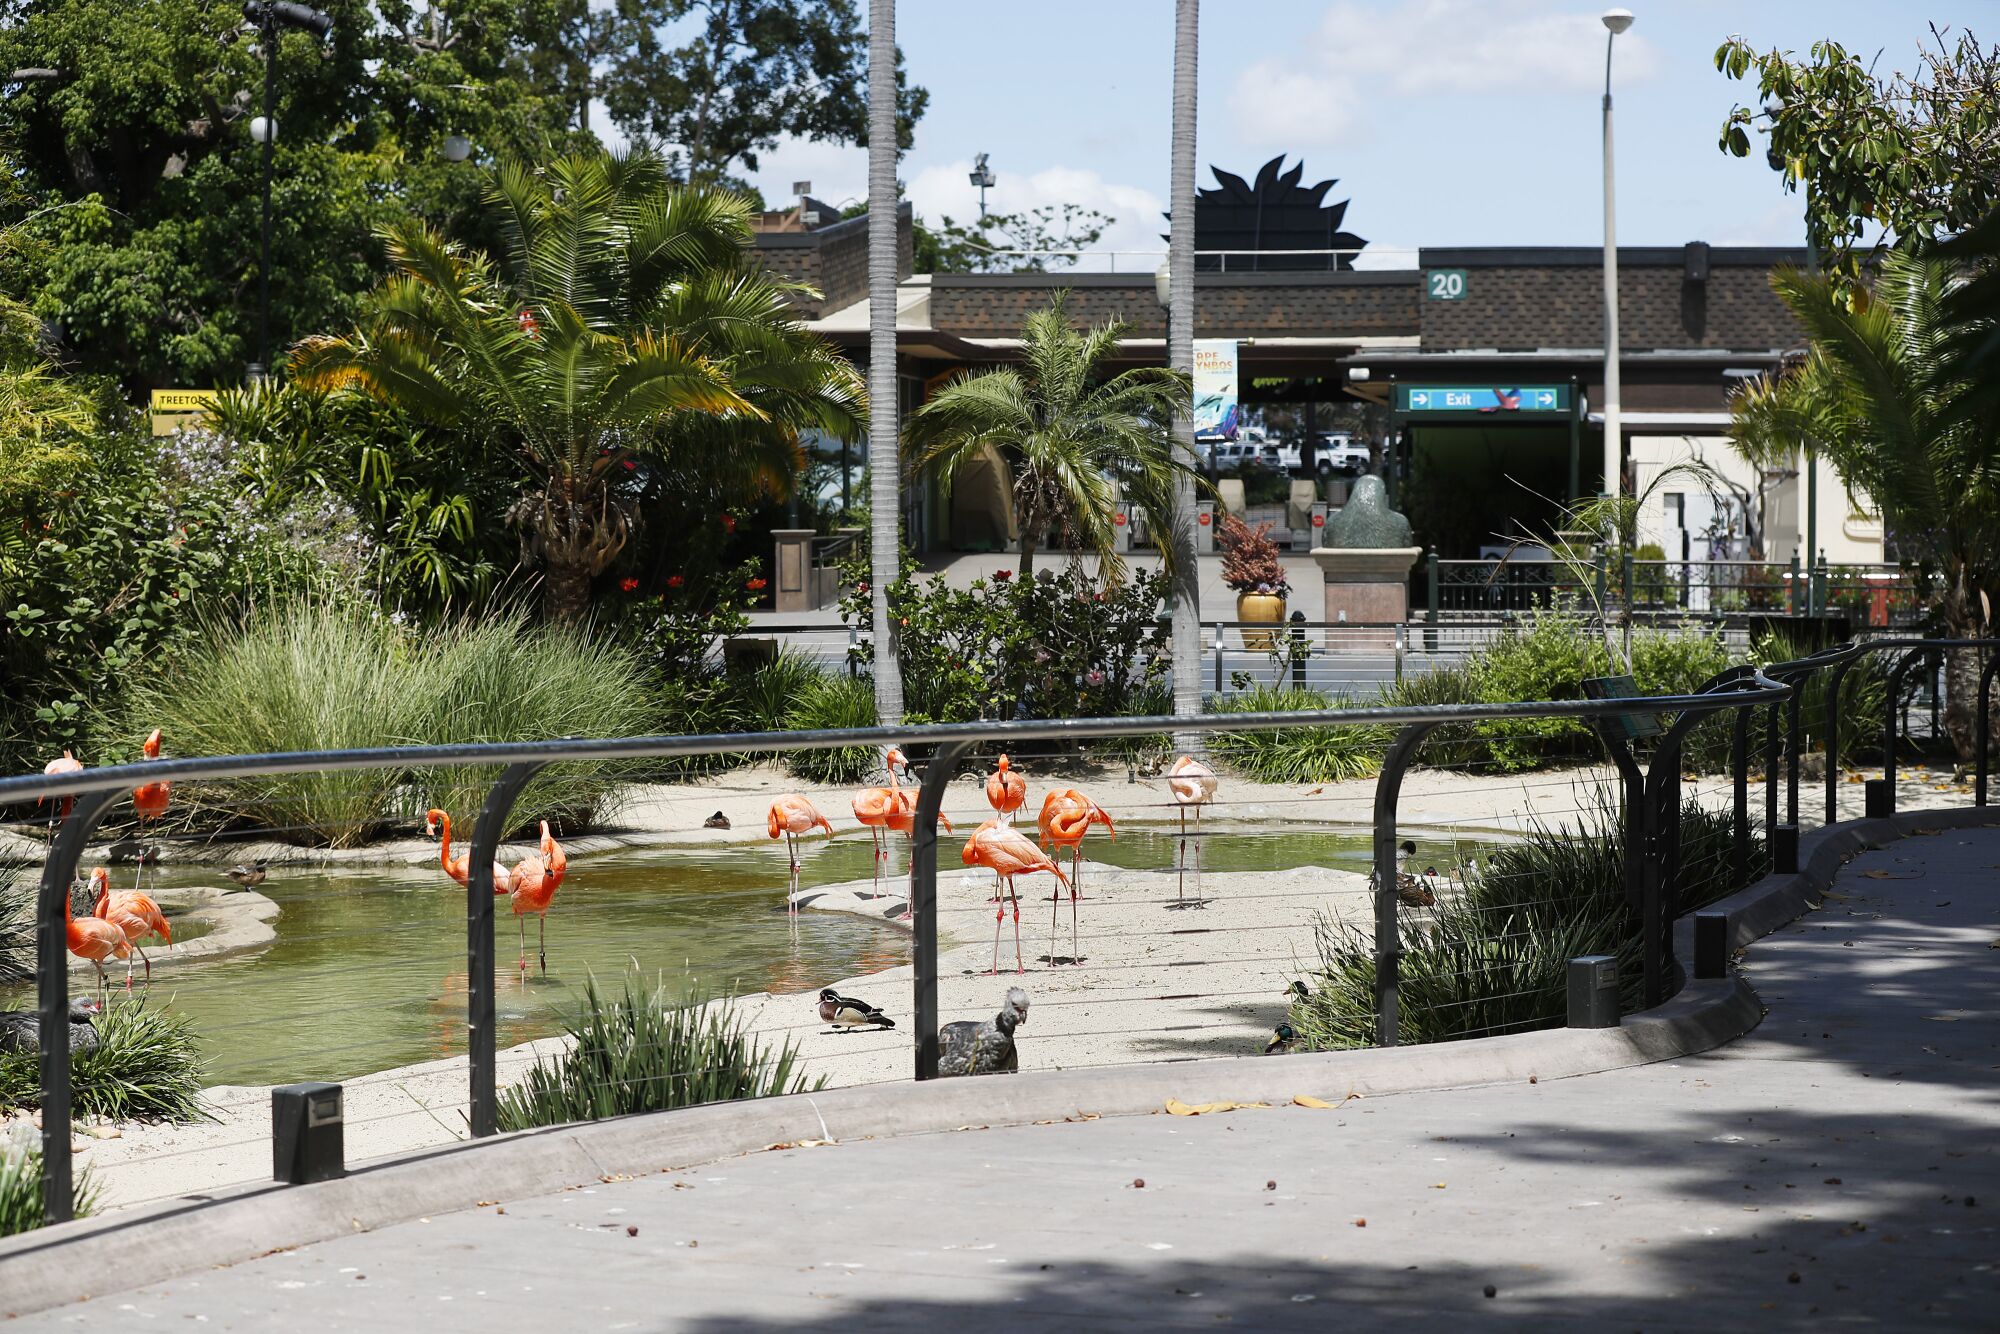 The flamingo area is normally one of the most crowded areas at the San Diego Zoo but not on May 19, 2020.